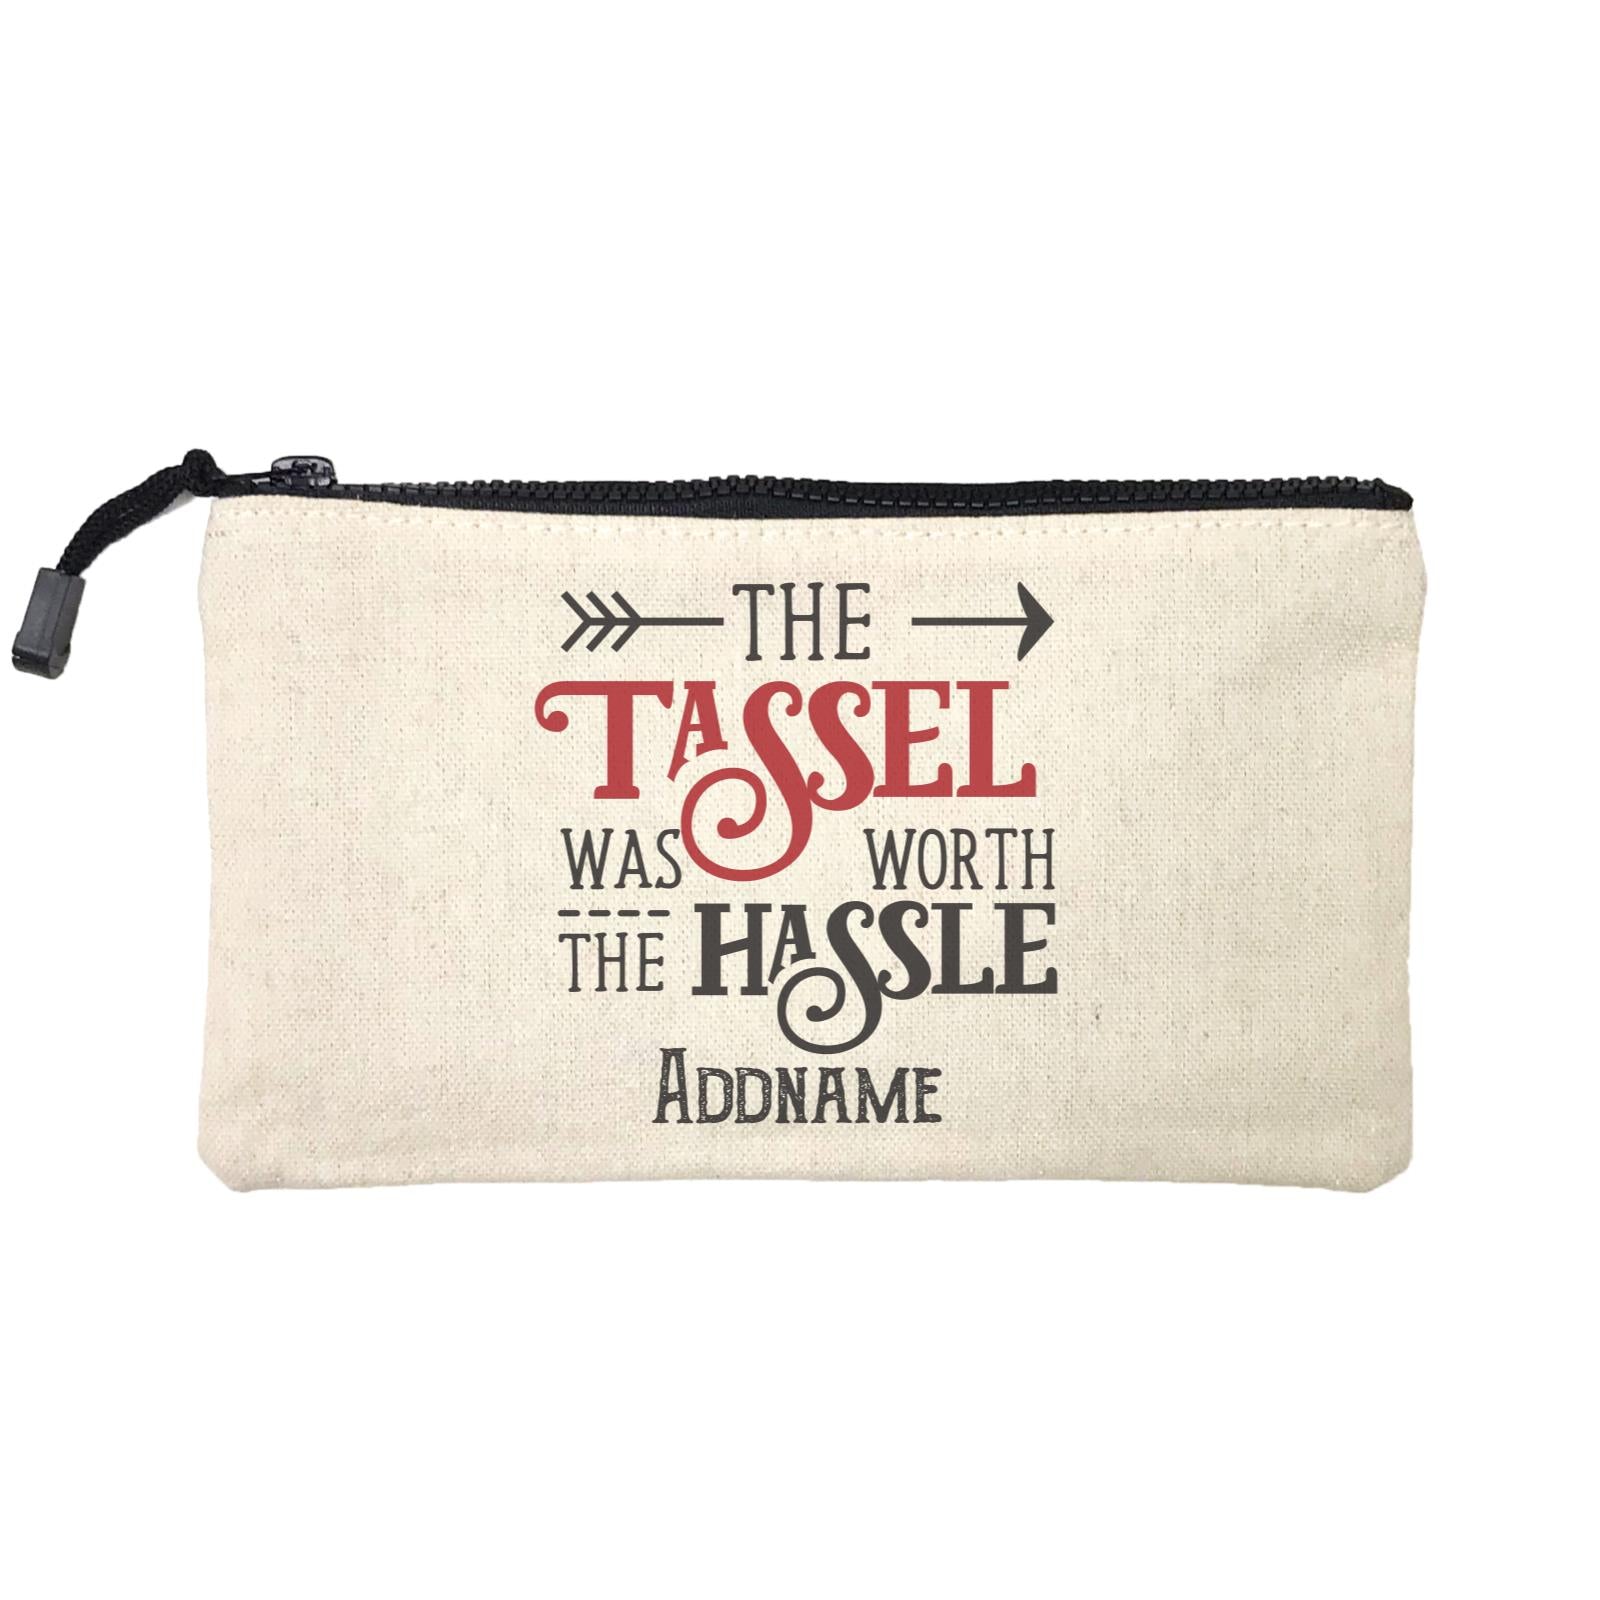 Graduation Series The Tassle Was Worth The Hassle Mini Accessories Stationery Pouch